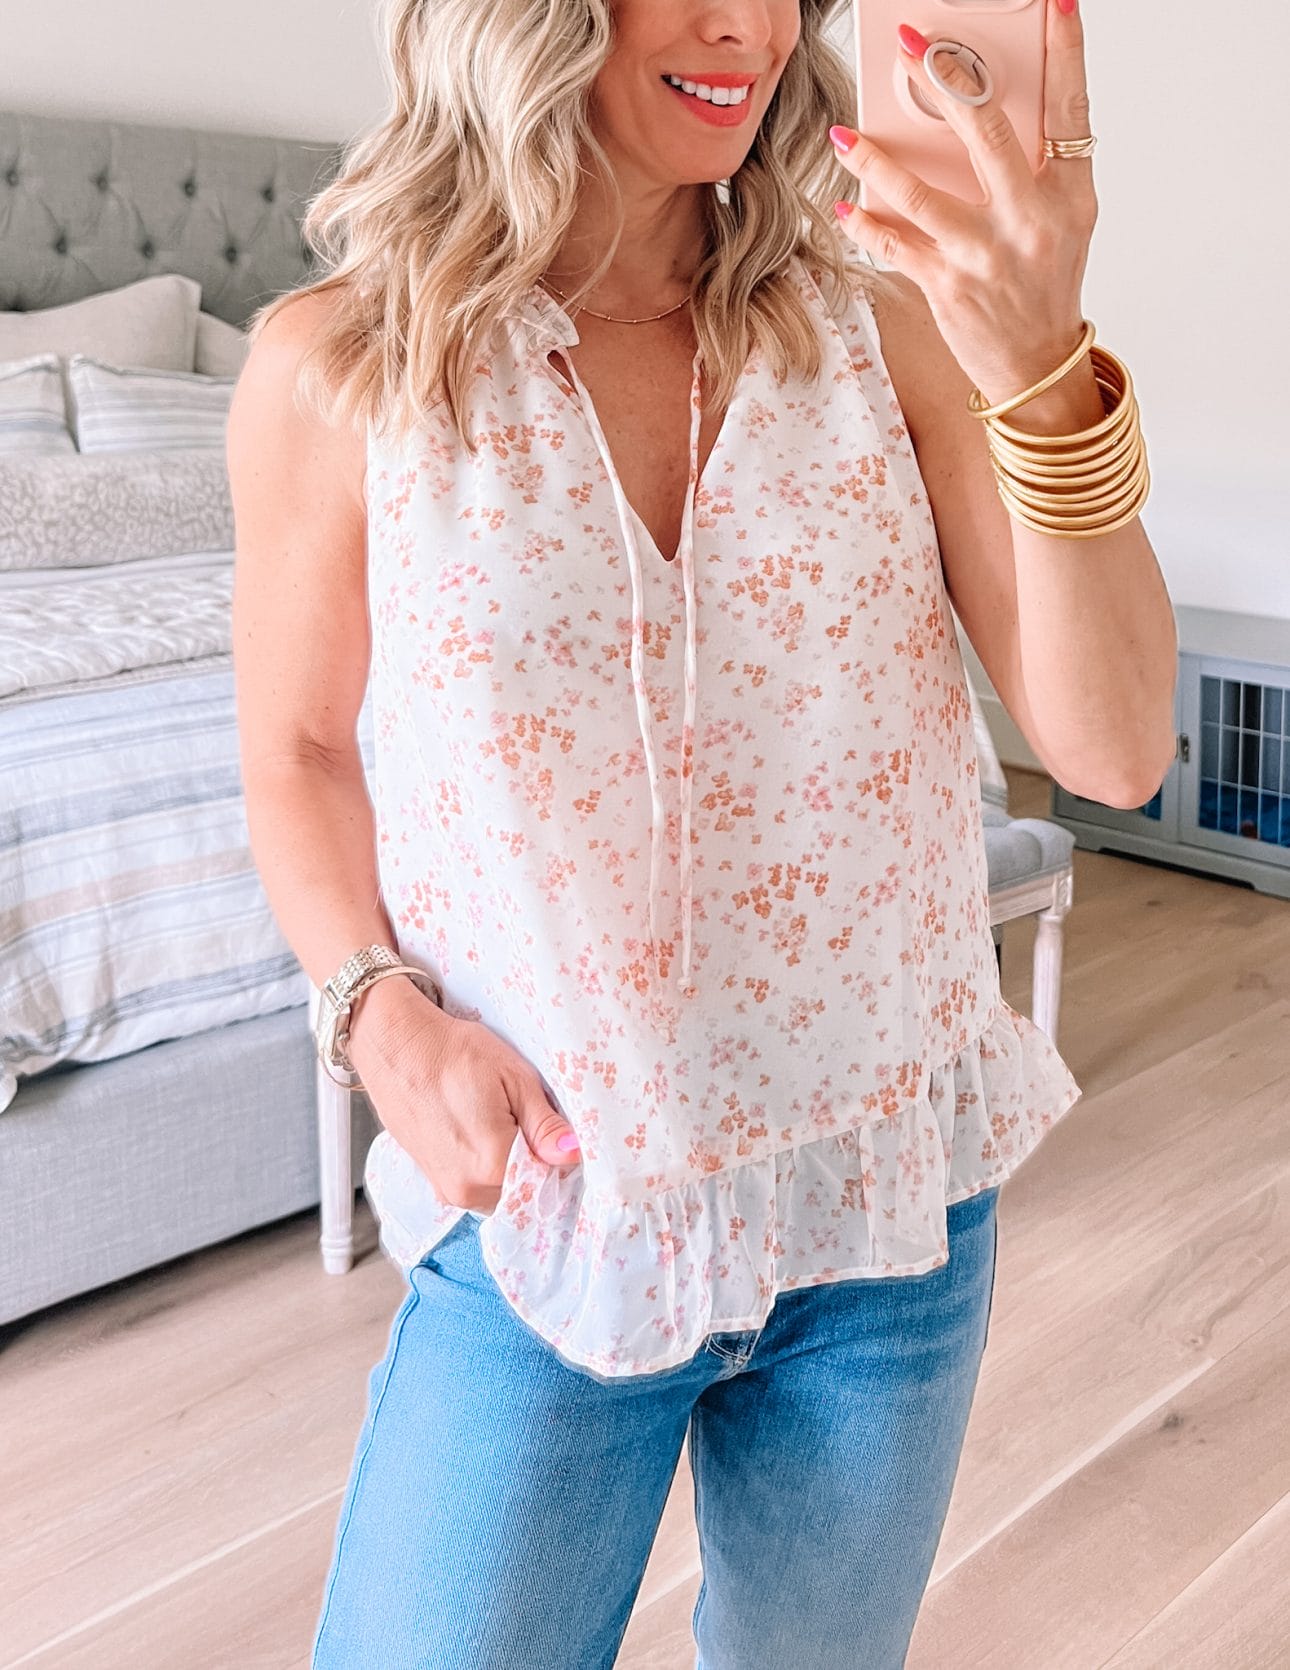 Gibson Floral Top, Mother Jeans